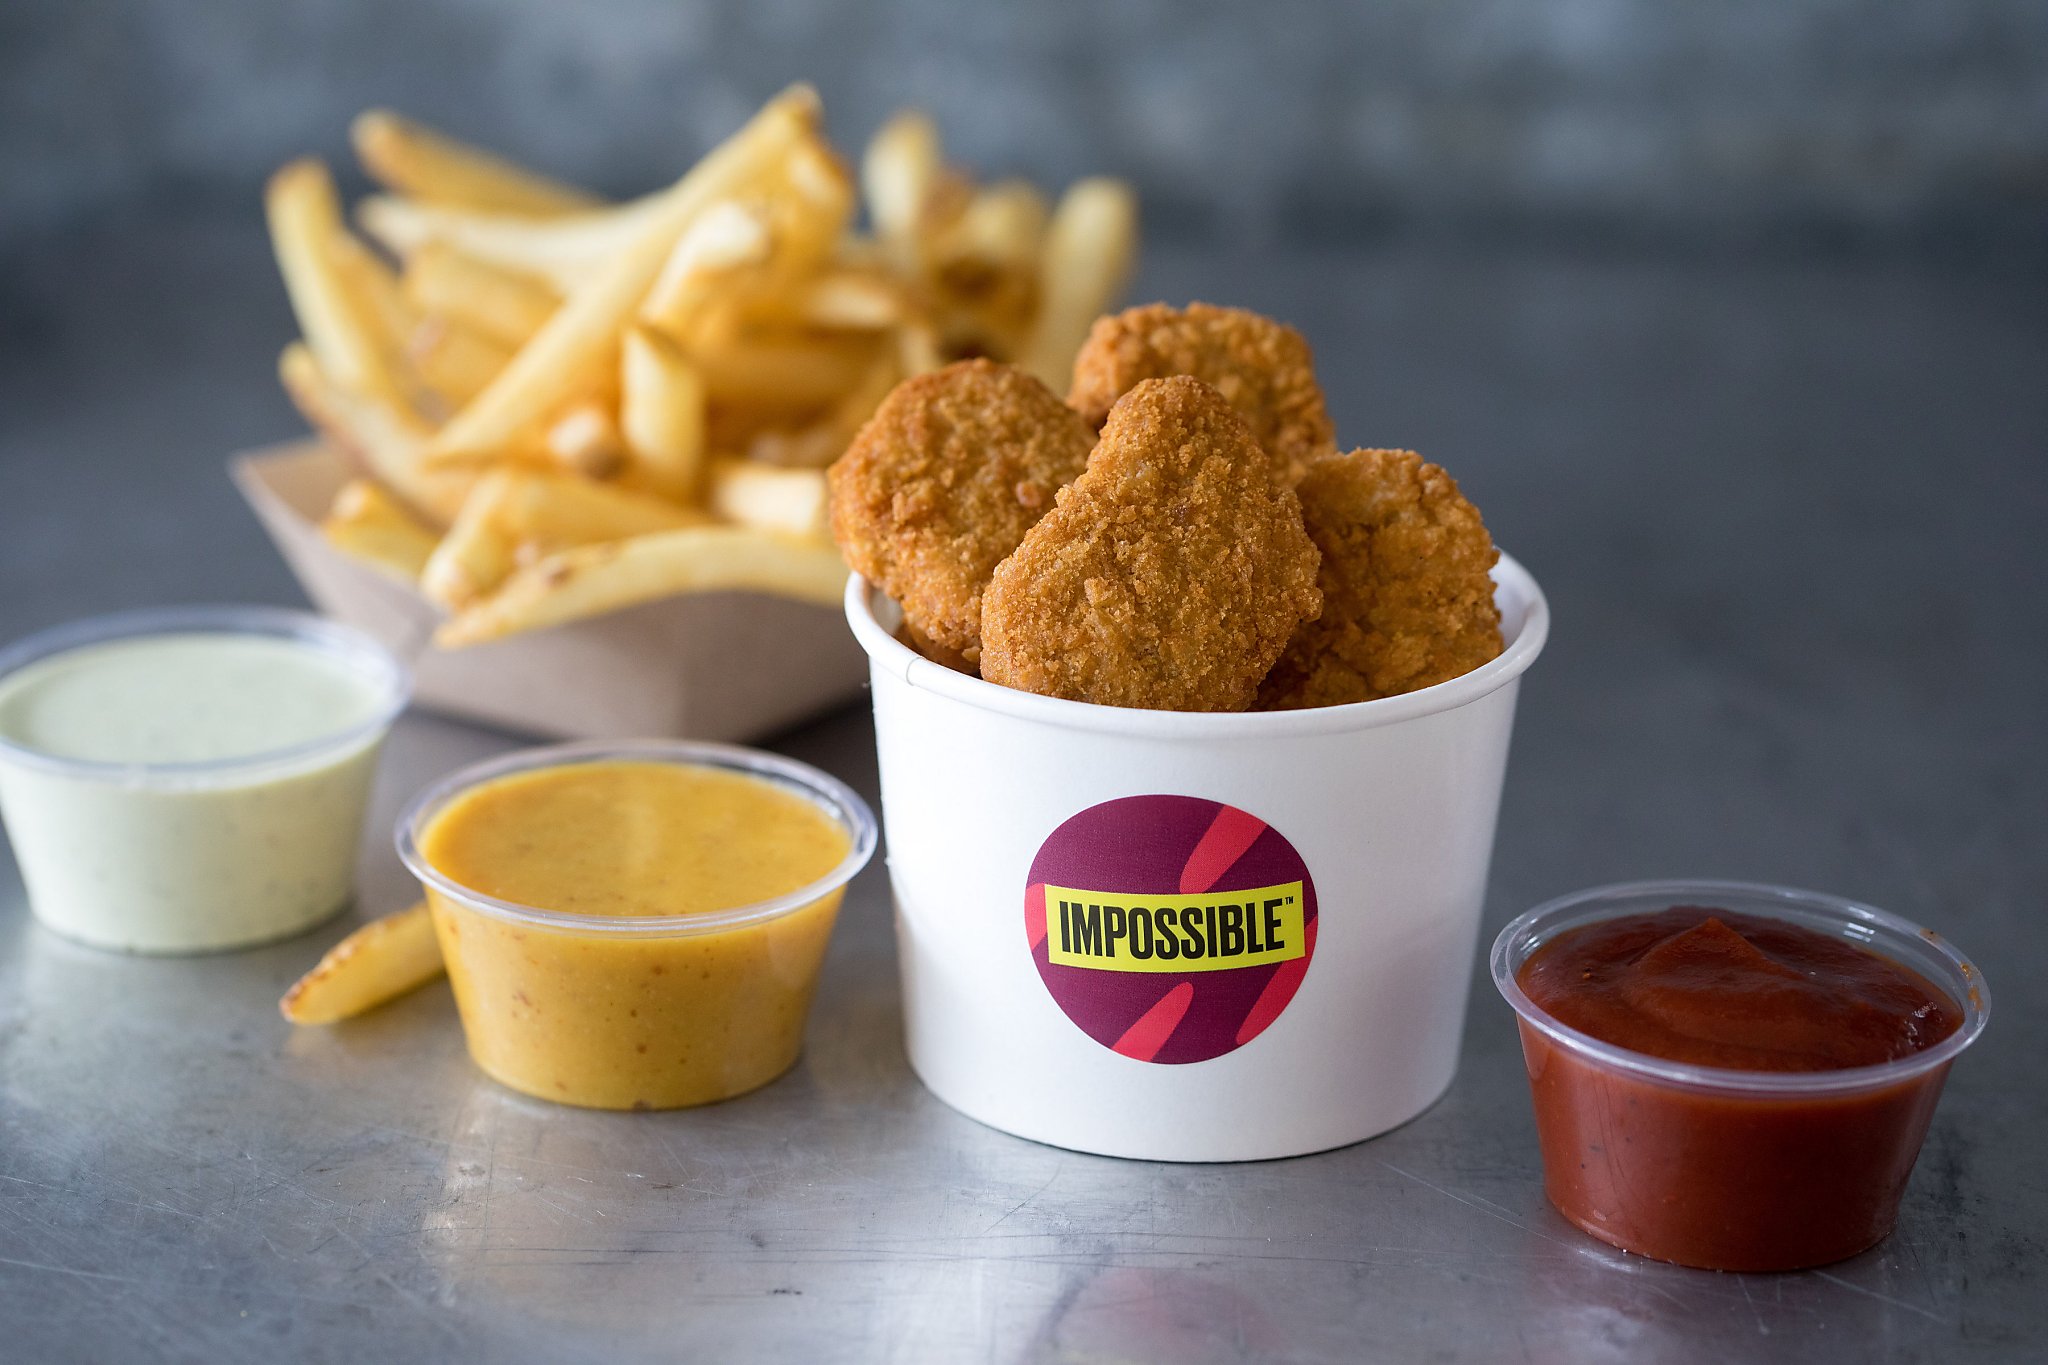 Impossible’s new vegan chicken has arrived. Here’s where to get the nuggets in the Bay Area